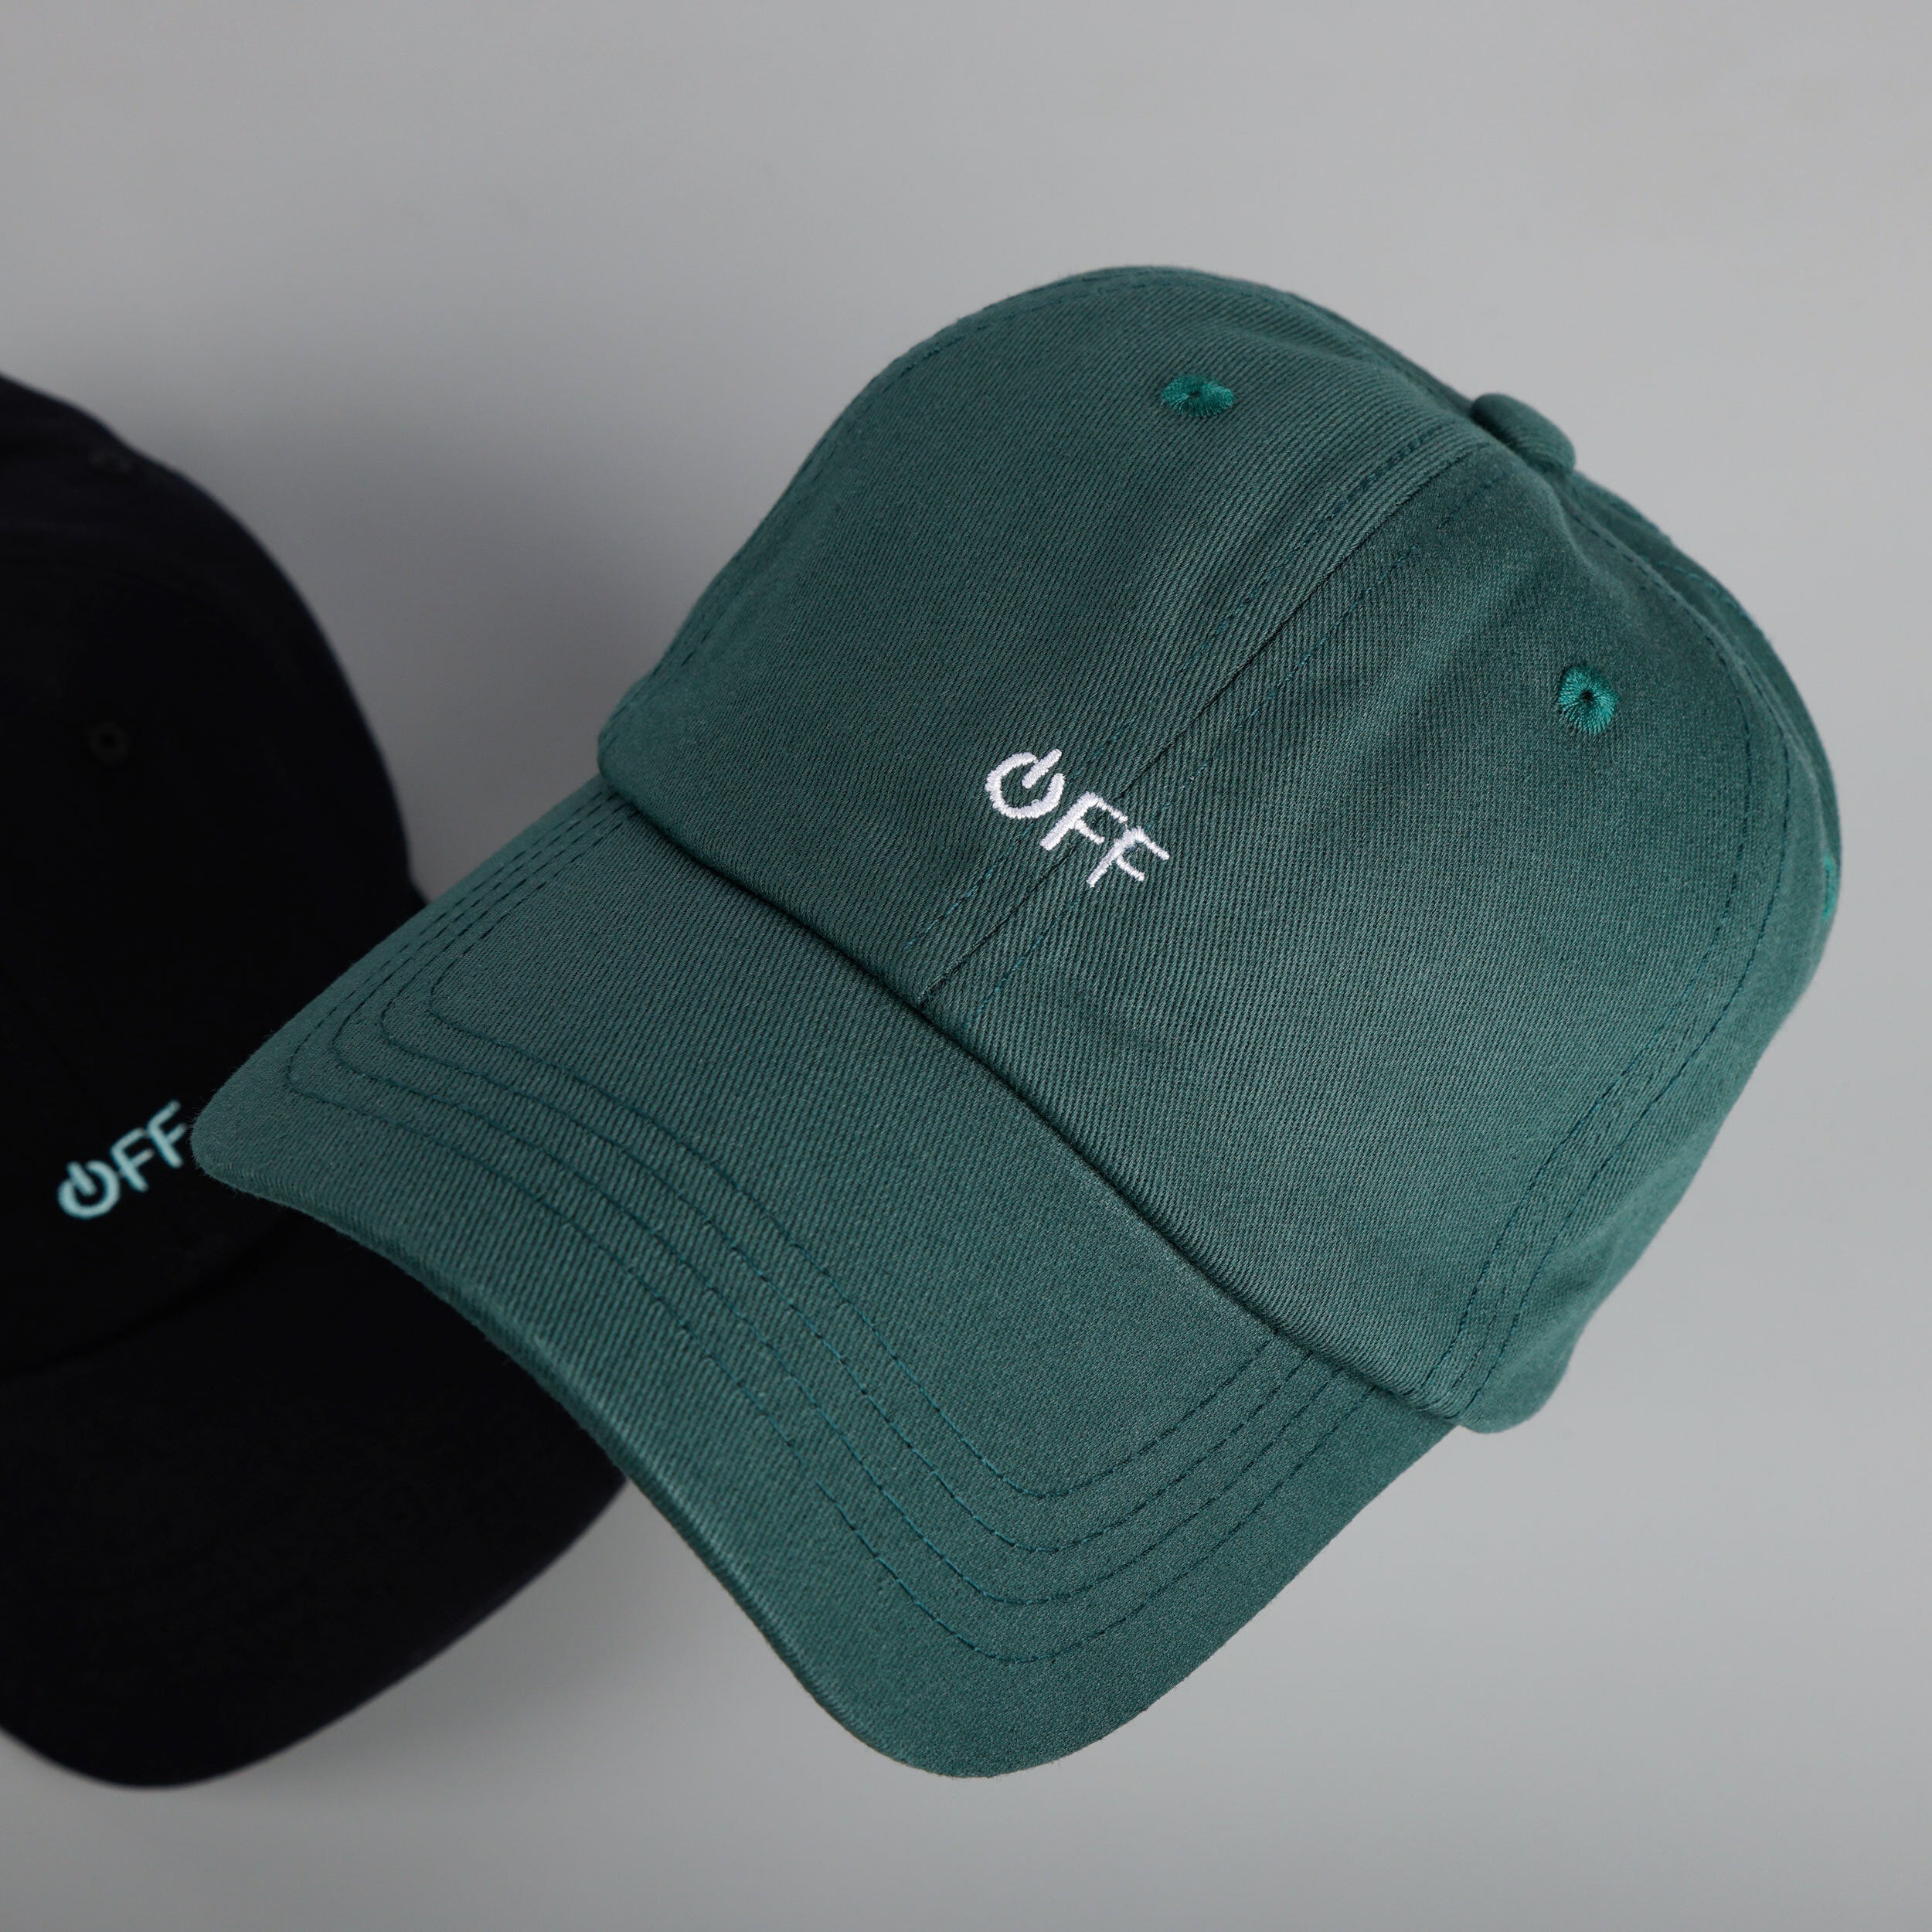 OFF grid Relaxed Fit Cap